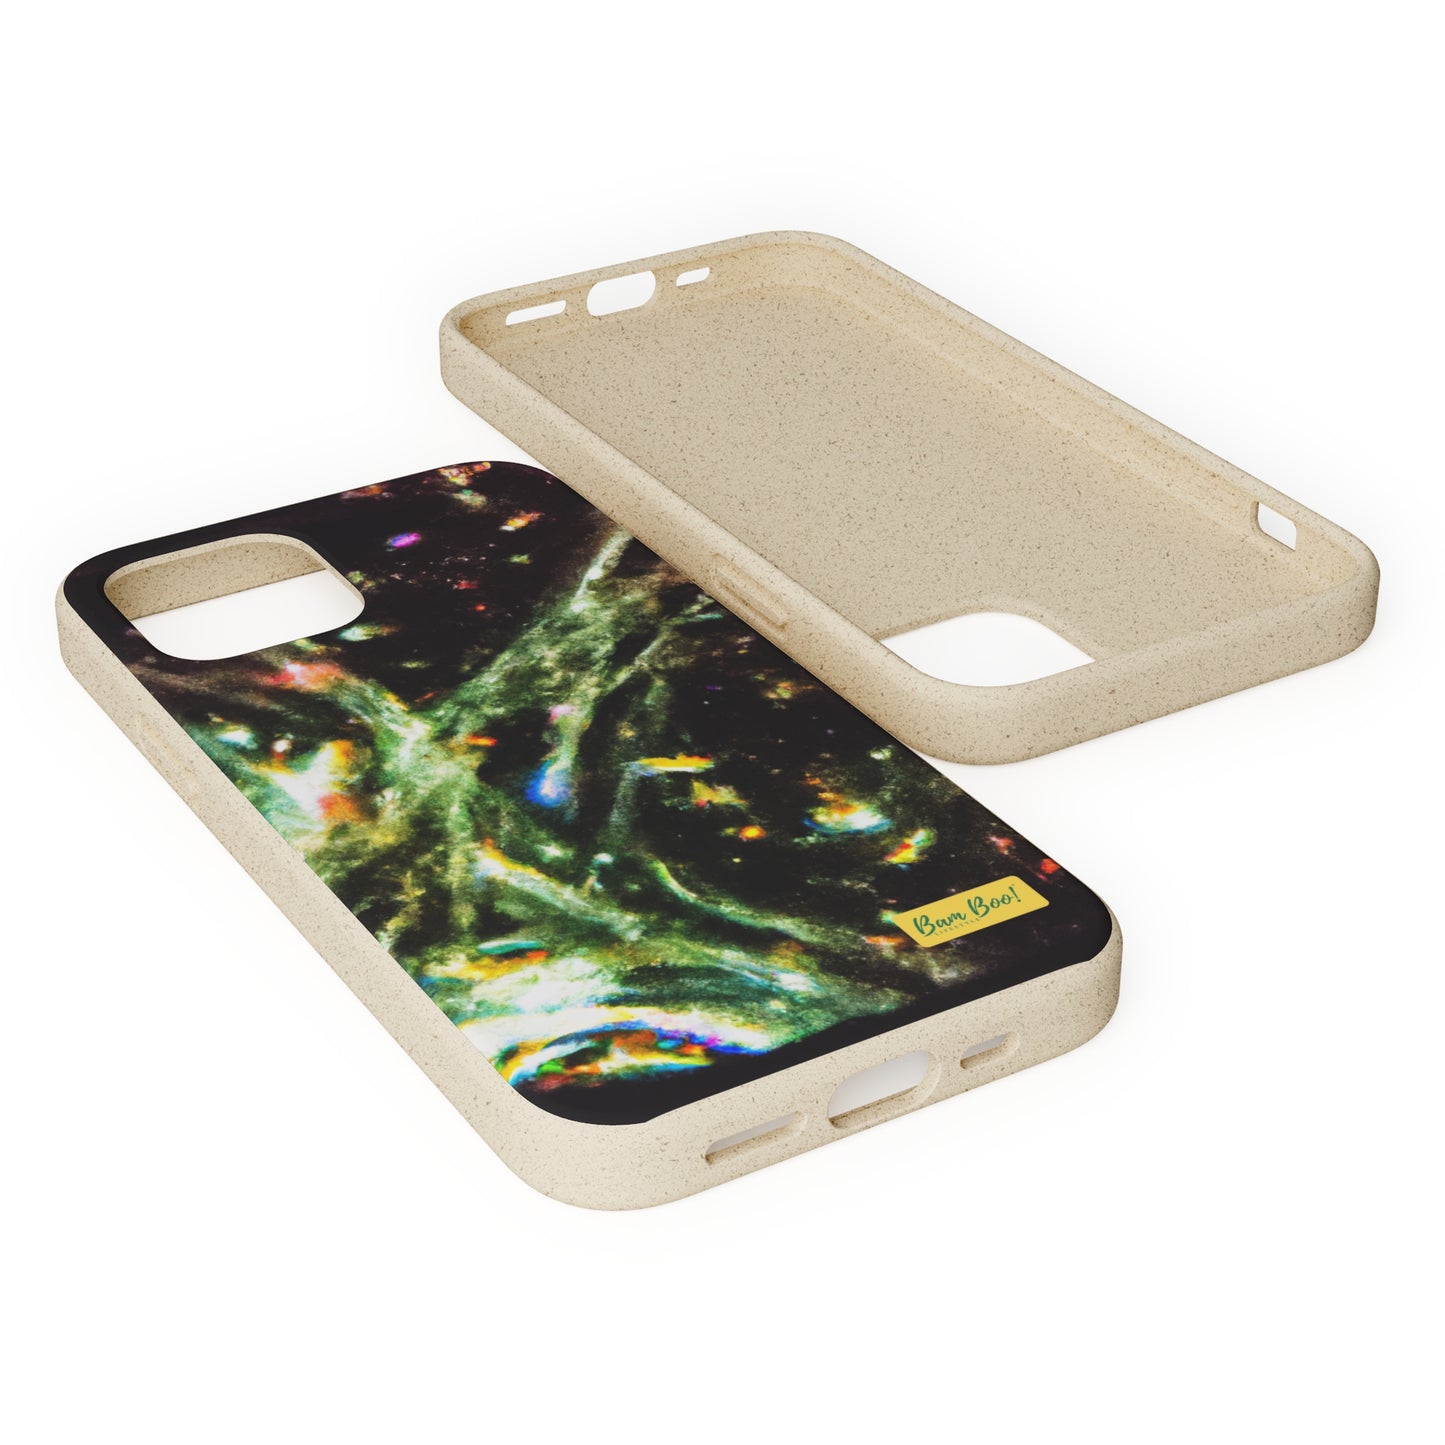 "The Splendid Symphony: An Abstract Exploration of Nature's Intricacies" - Bam Boo! Lifestyle Eco-friendly Cases